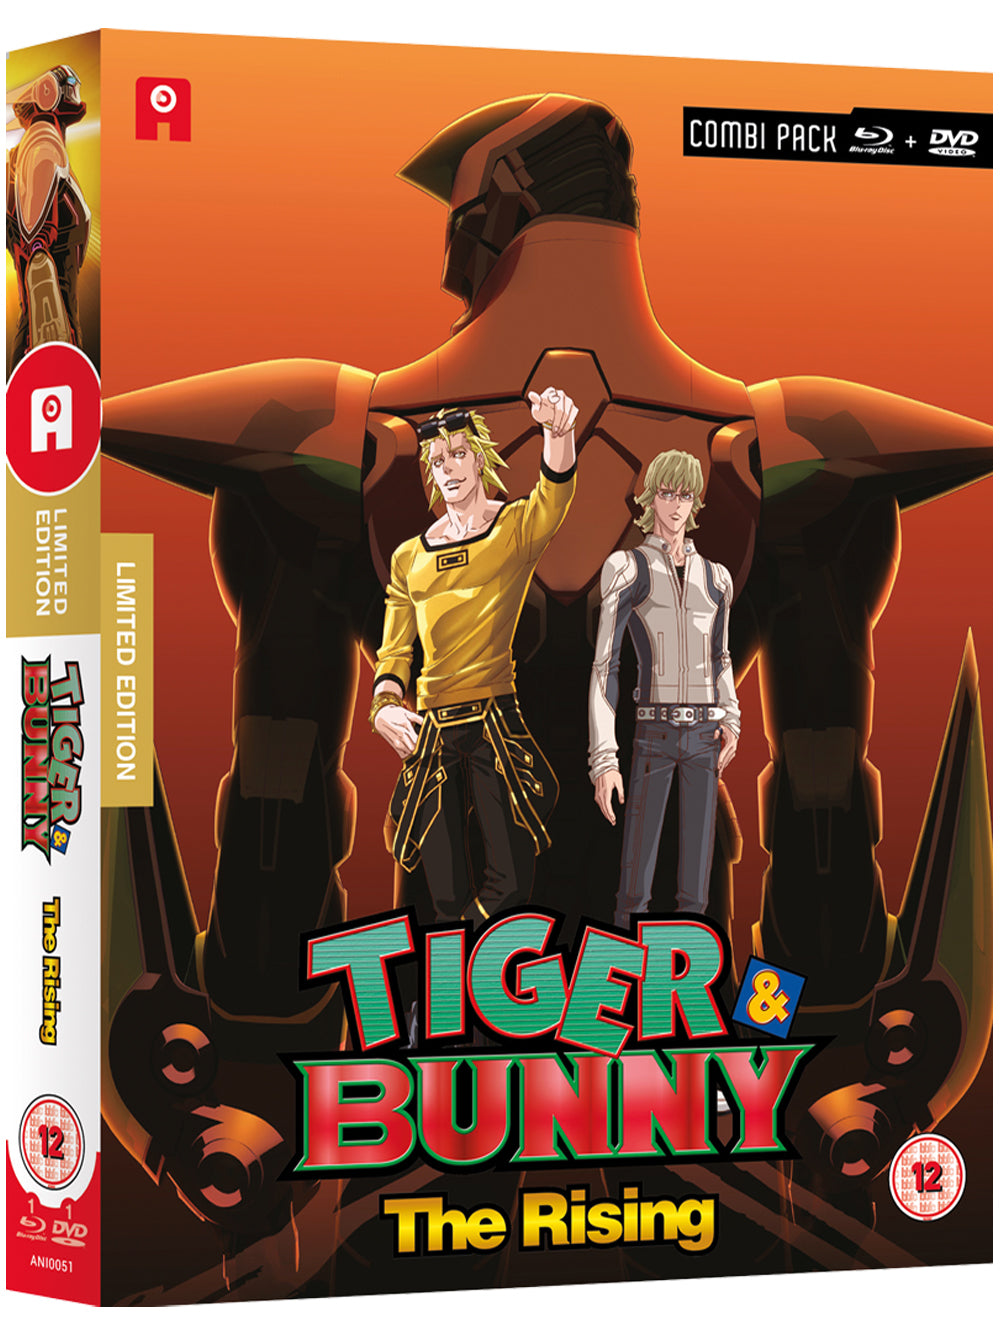 Tiger & Bunny: The Rising - Blu-ray/DVD Collector's Edition